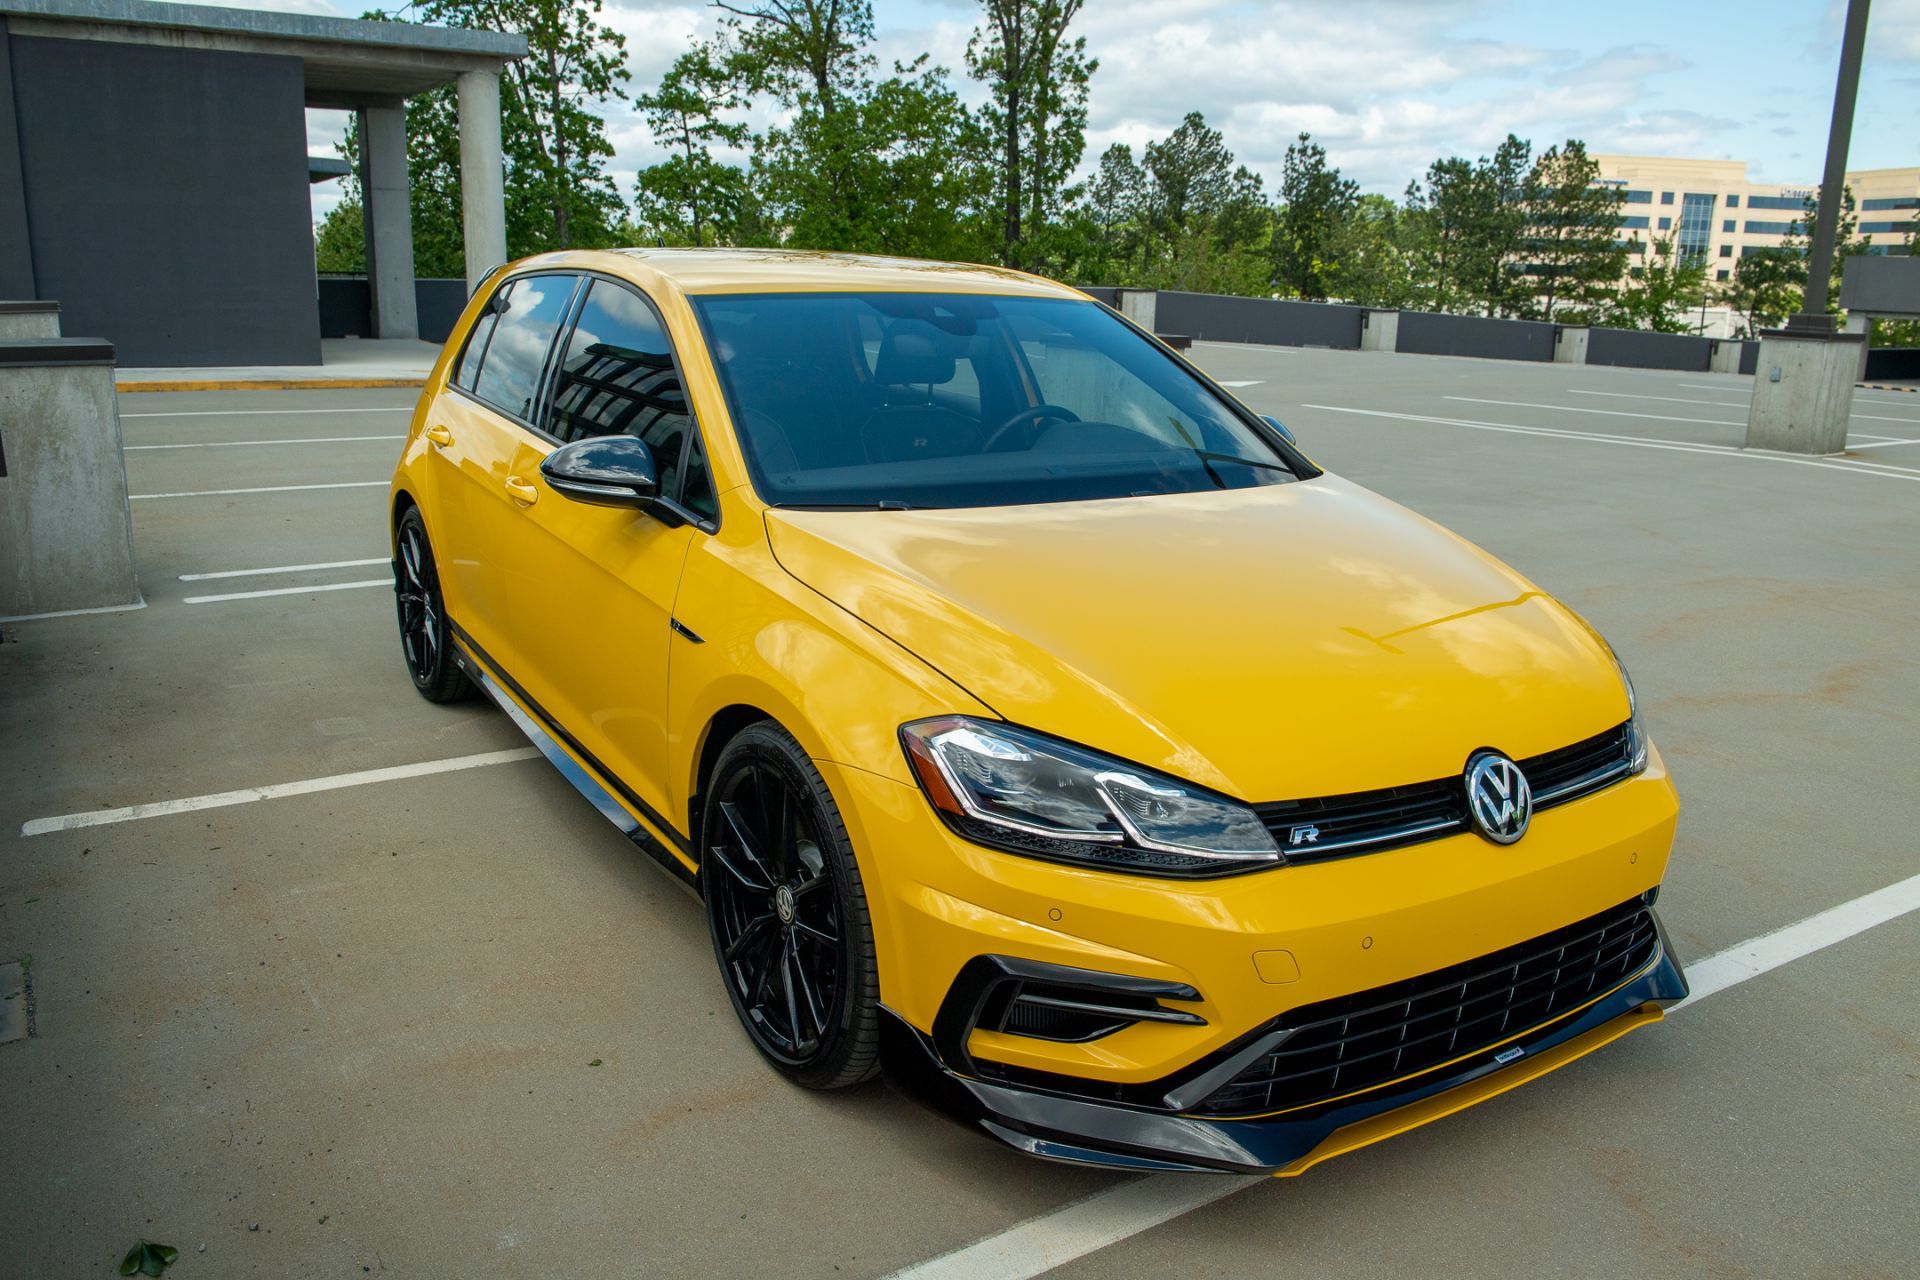 Viper Green Was America's Most Popular Spektrum Color For 2019 VW Golf